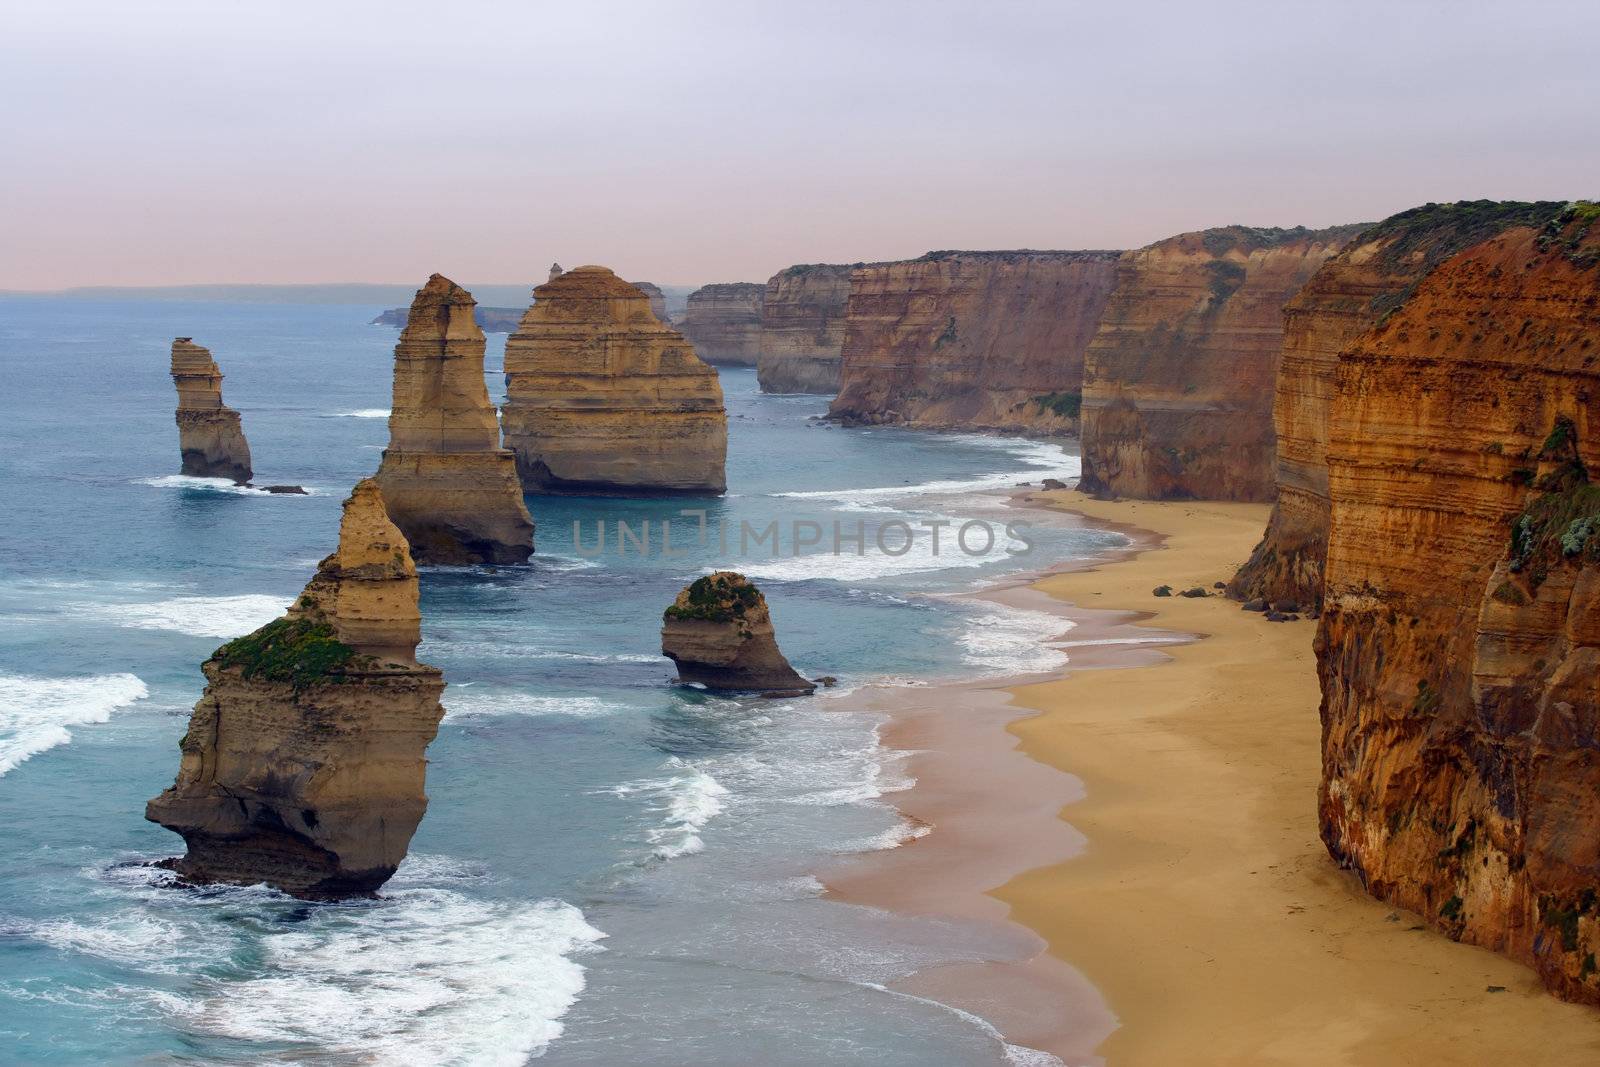 The Twelve Apostles along the Great Ocean Road, Australia.  Photo was taken in December 2004 before the 'apostle' in the front had fallen.
